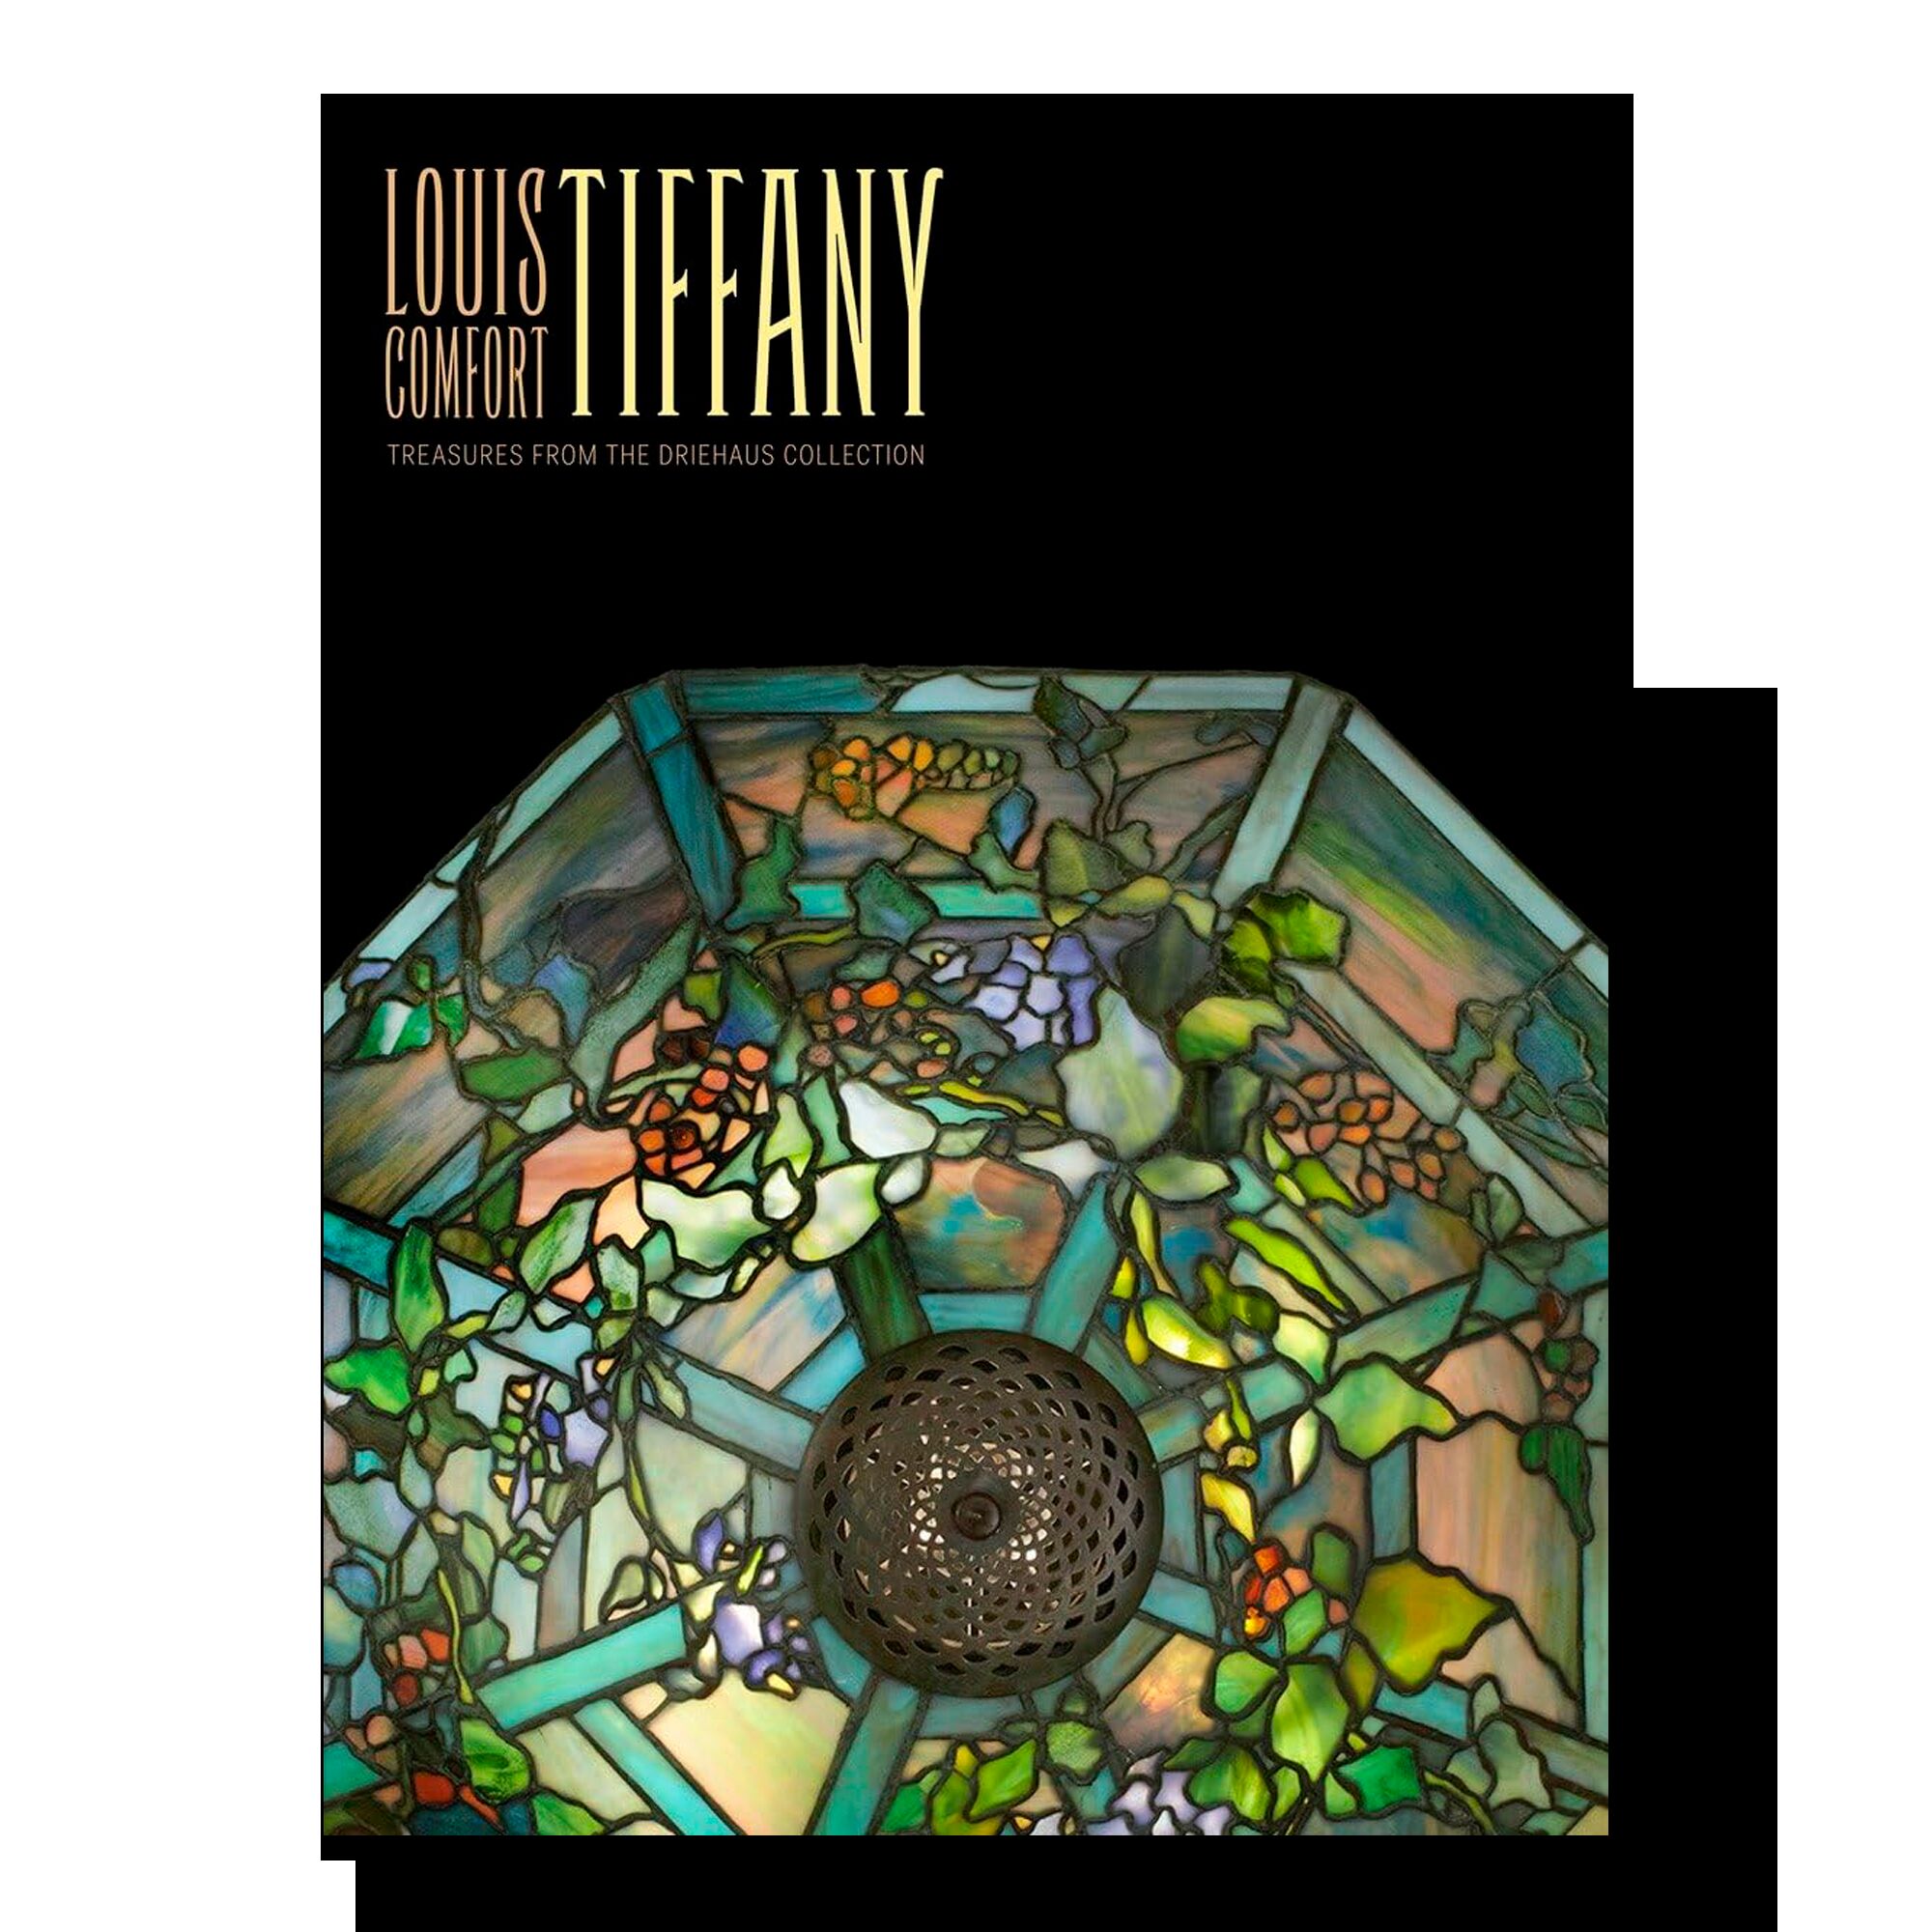 Louis Comfort-Tiffany: Treasures from the Driehaus Collection